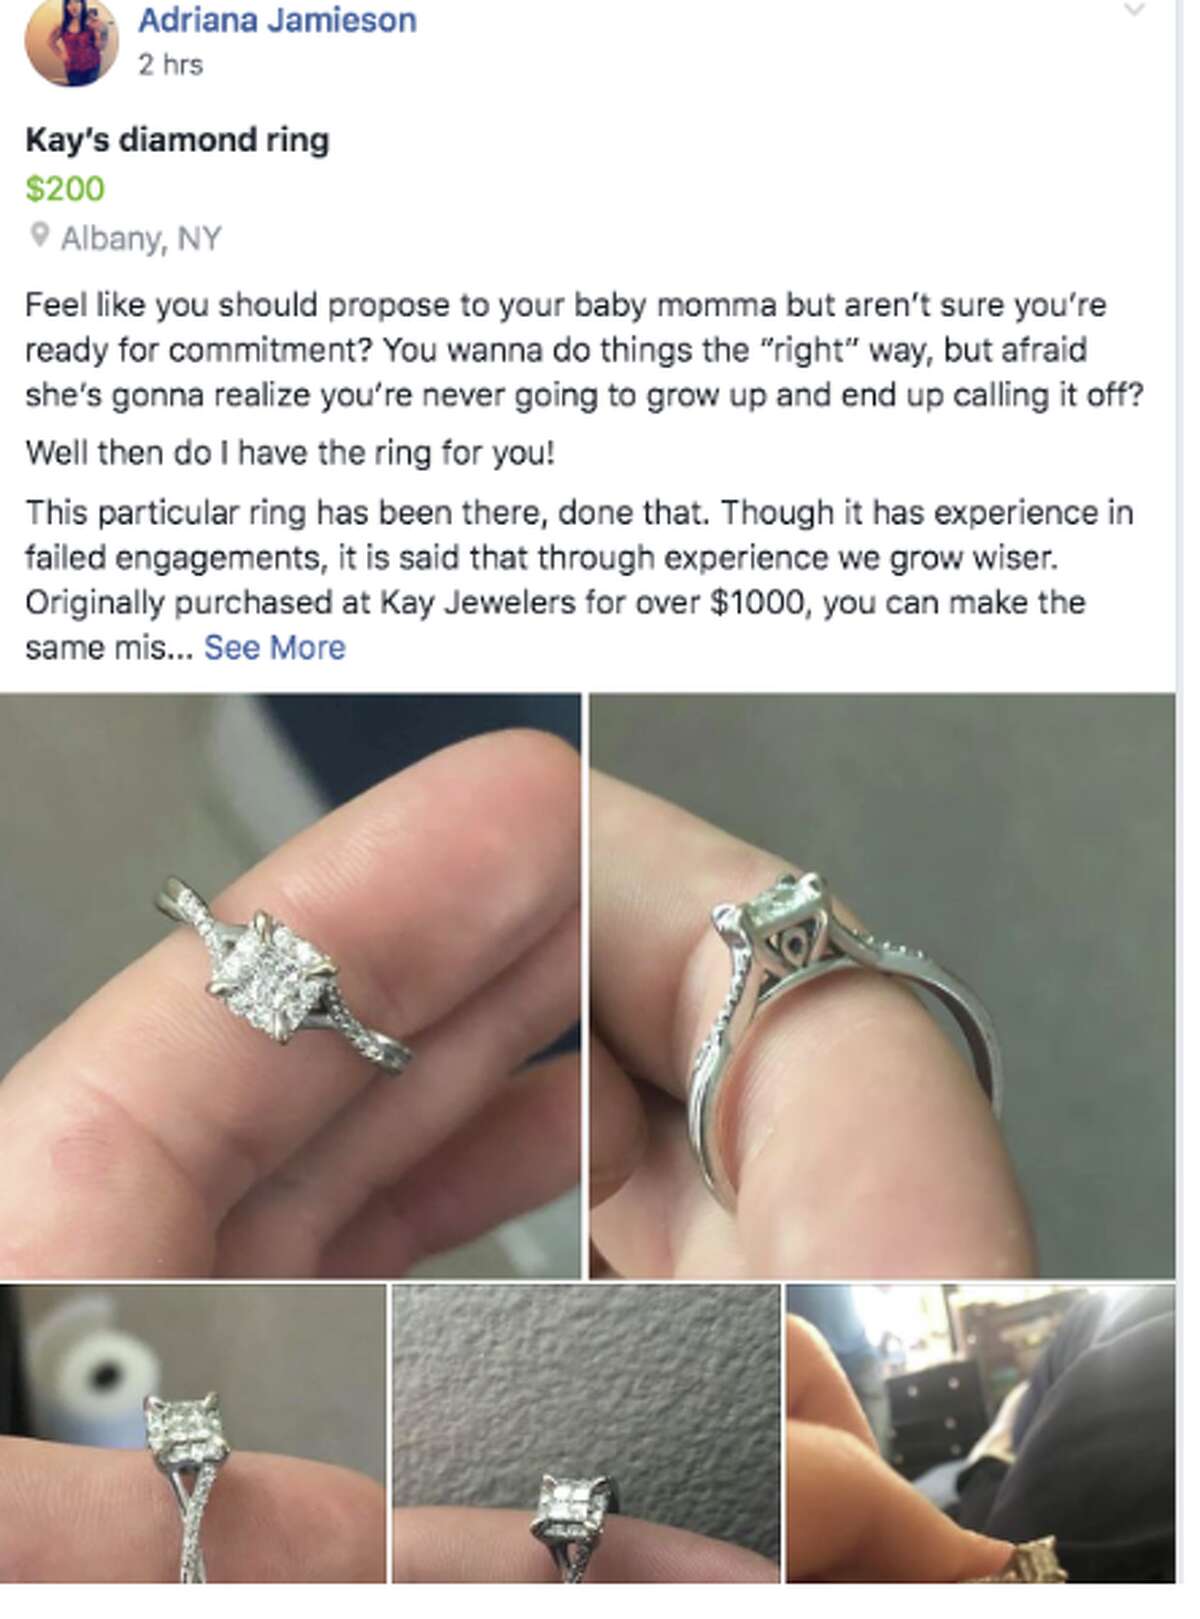 Local woman sells engagement ring in 